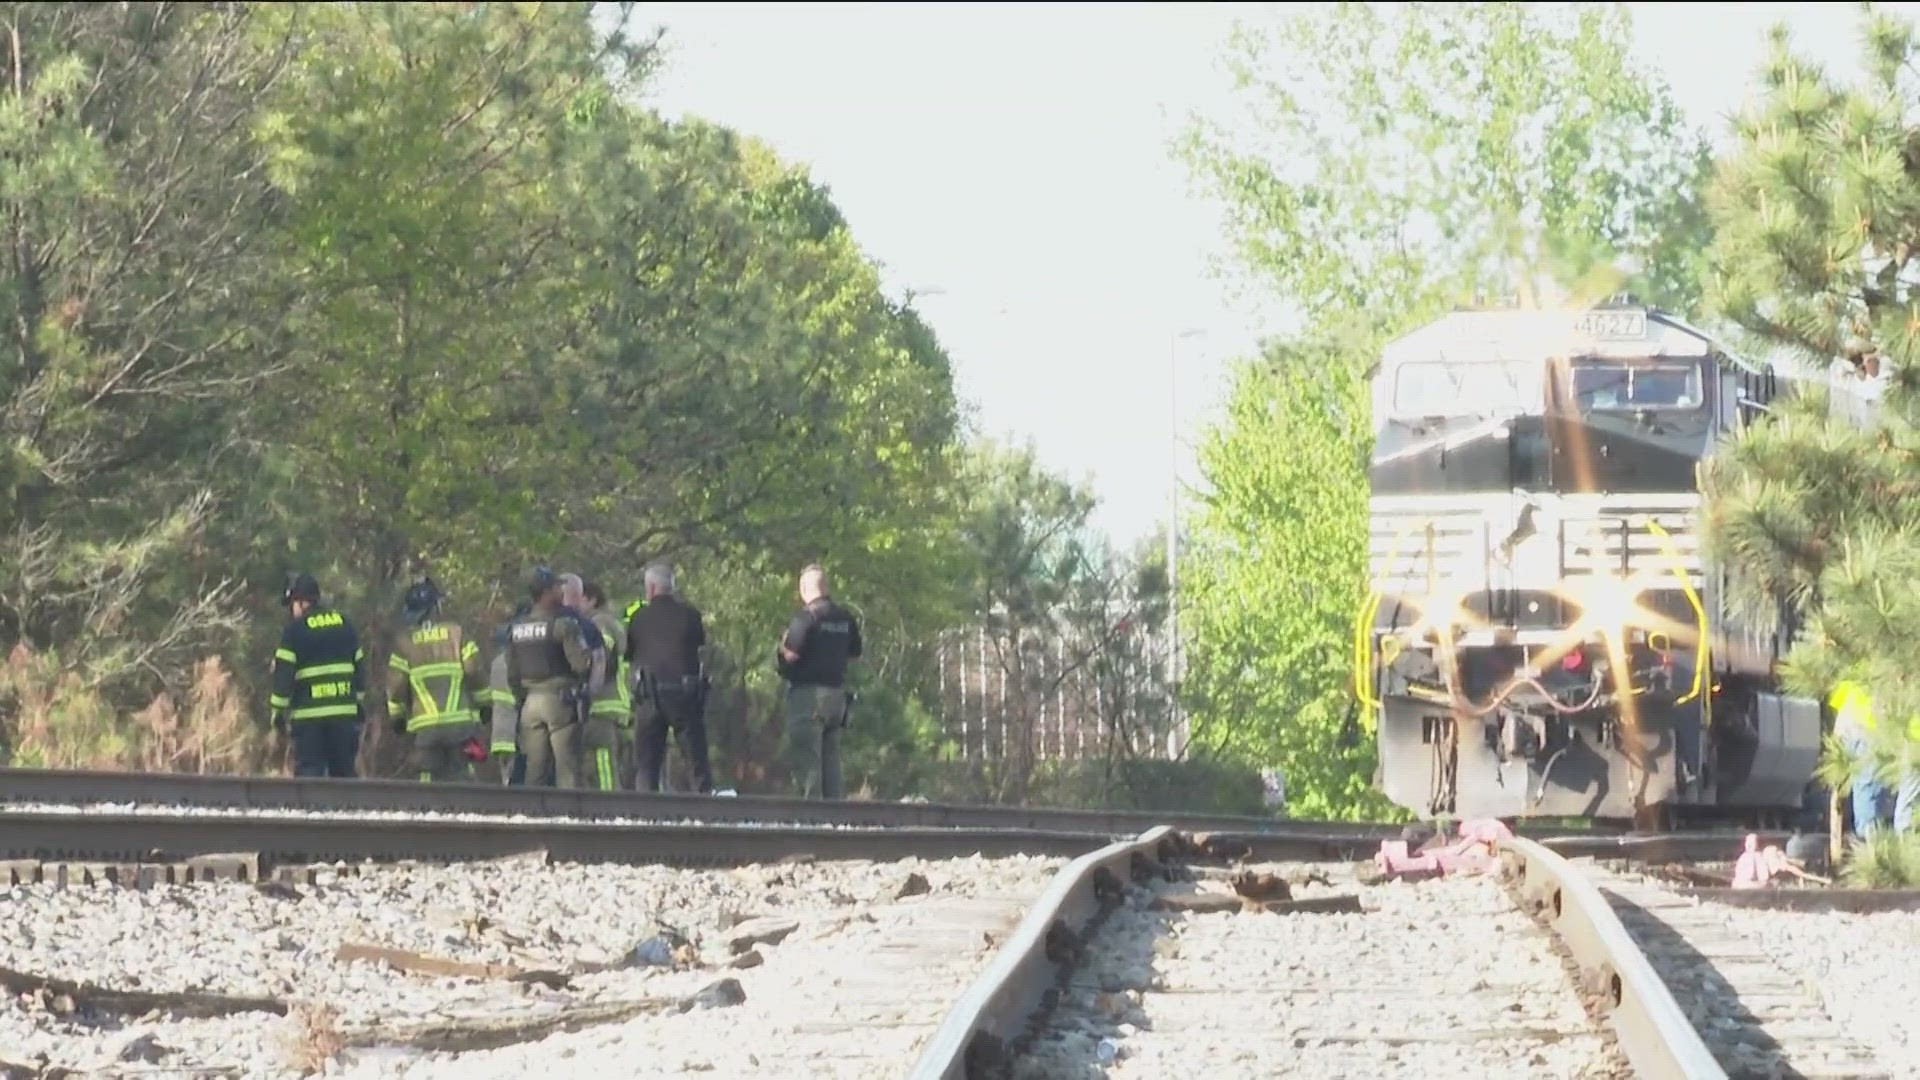 The crash involved only one car near train tracks on Flowers Road and School Drive in Doraville.